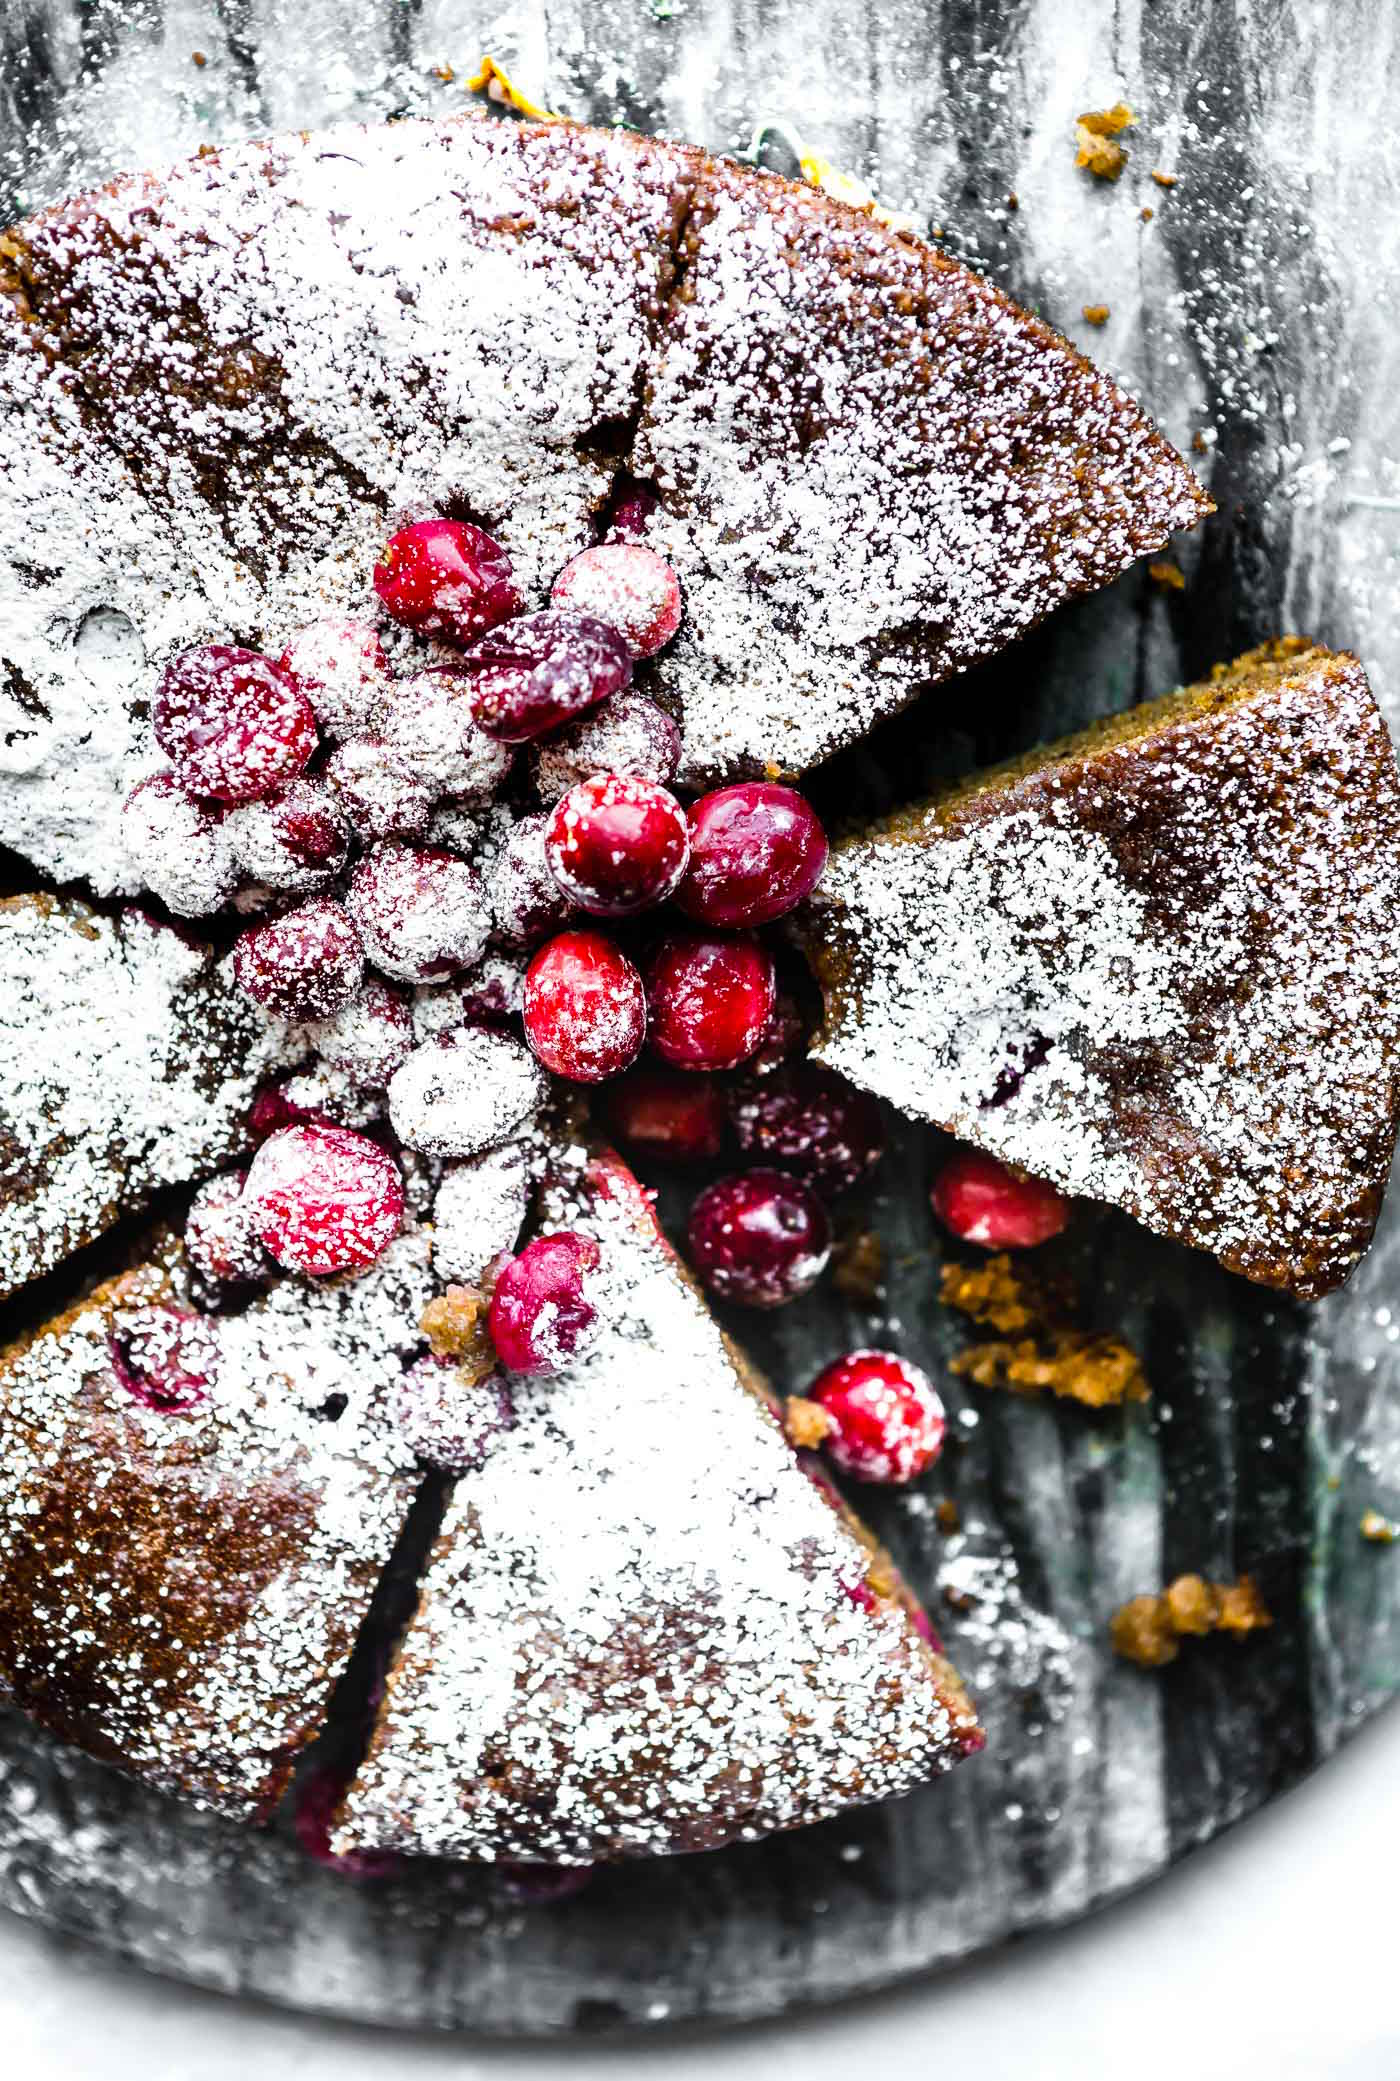 Cranberry Sour Cream Almond Cake is a flavorful grain free almond cake that tastes just like favorite sour cream coffee cake, but healthier. Made with fresh cranberries, almond flour, sour cream, eggs, and a simple maple glaze. Every bite is moist and delish! Ready in under an hour. 